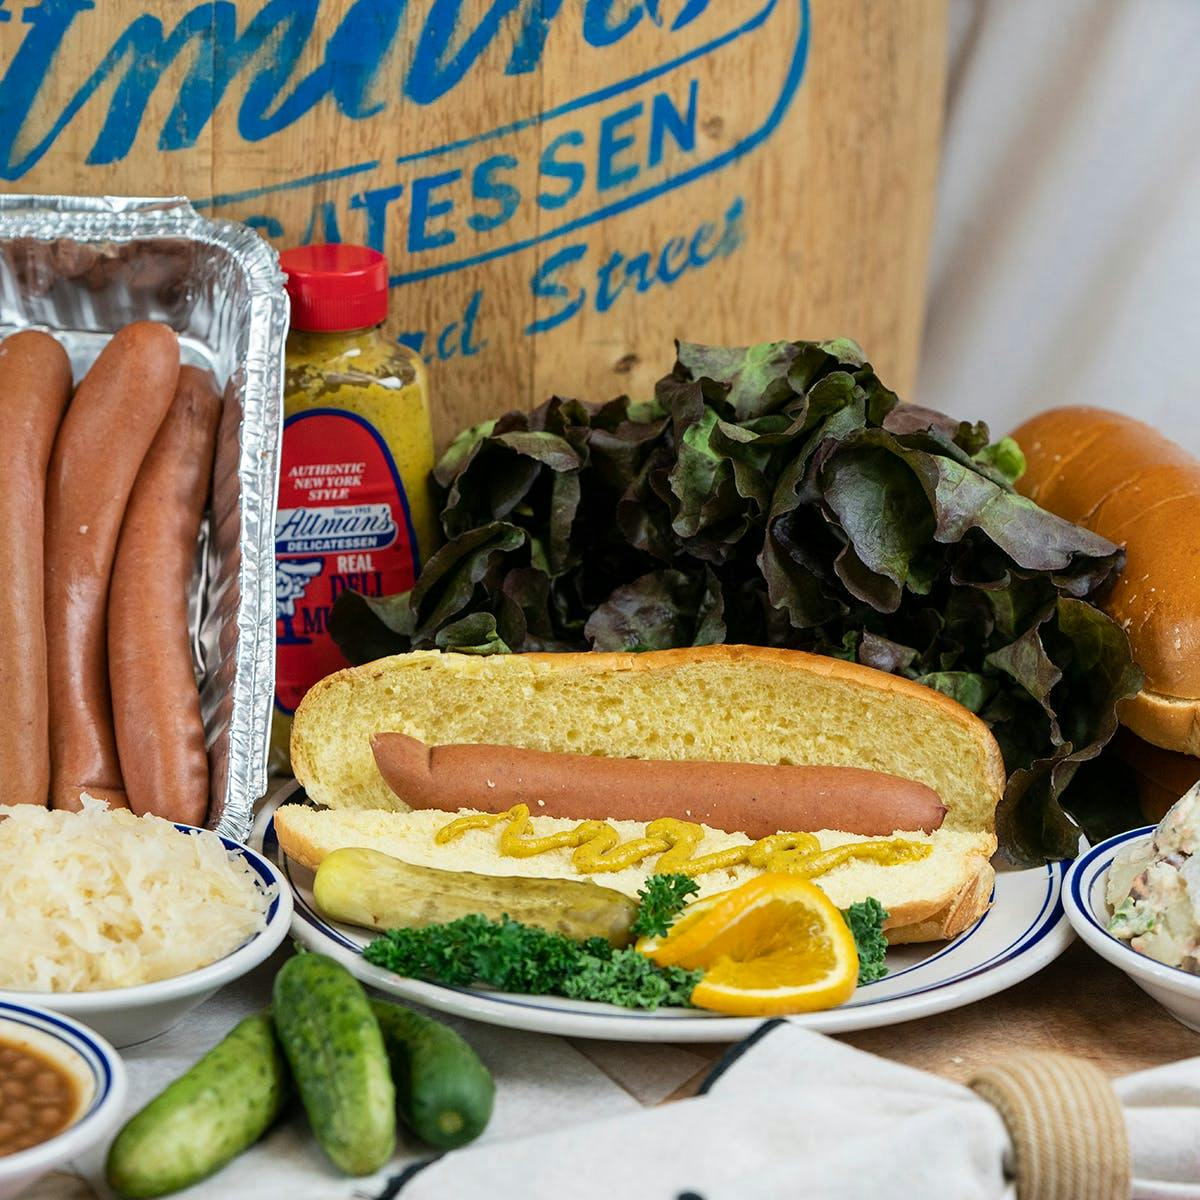 Free Stock Photo of A variety of gourmet hot dogs in a row